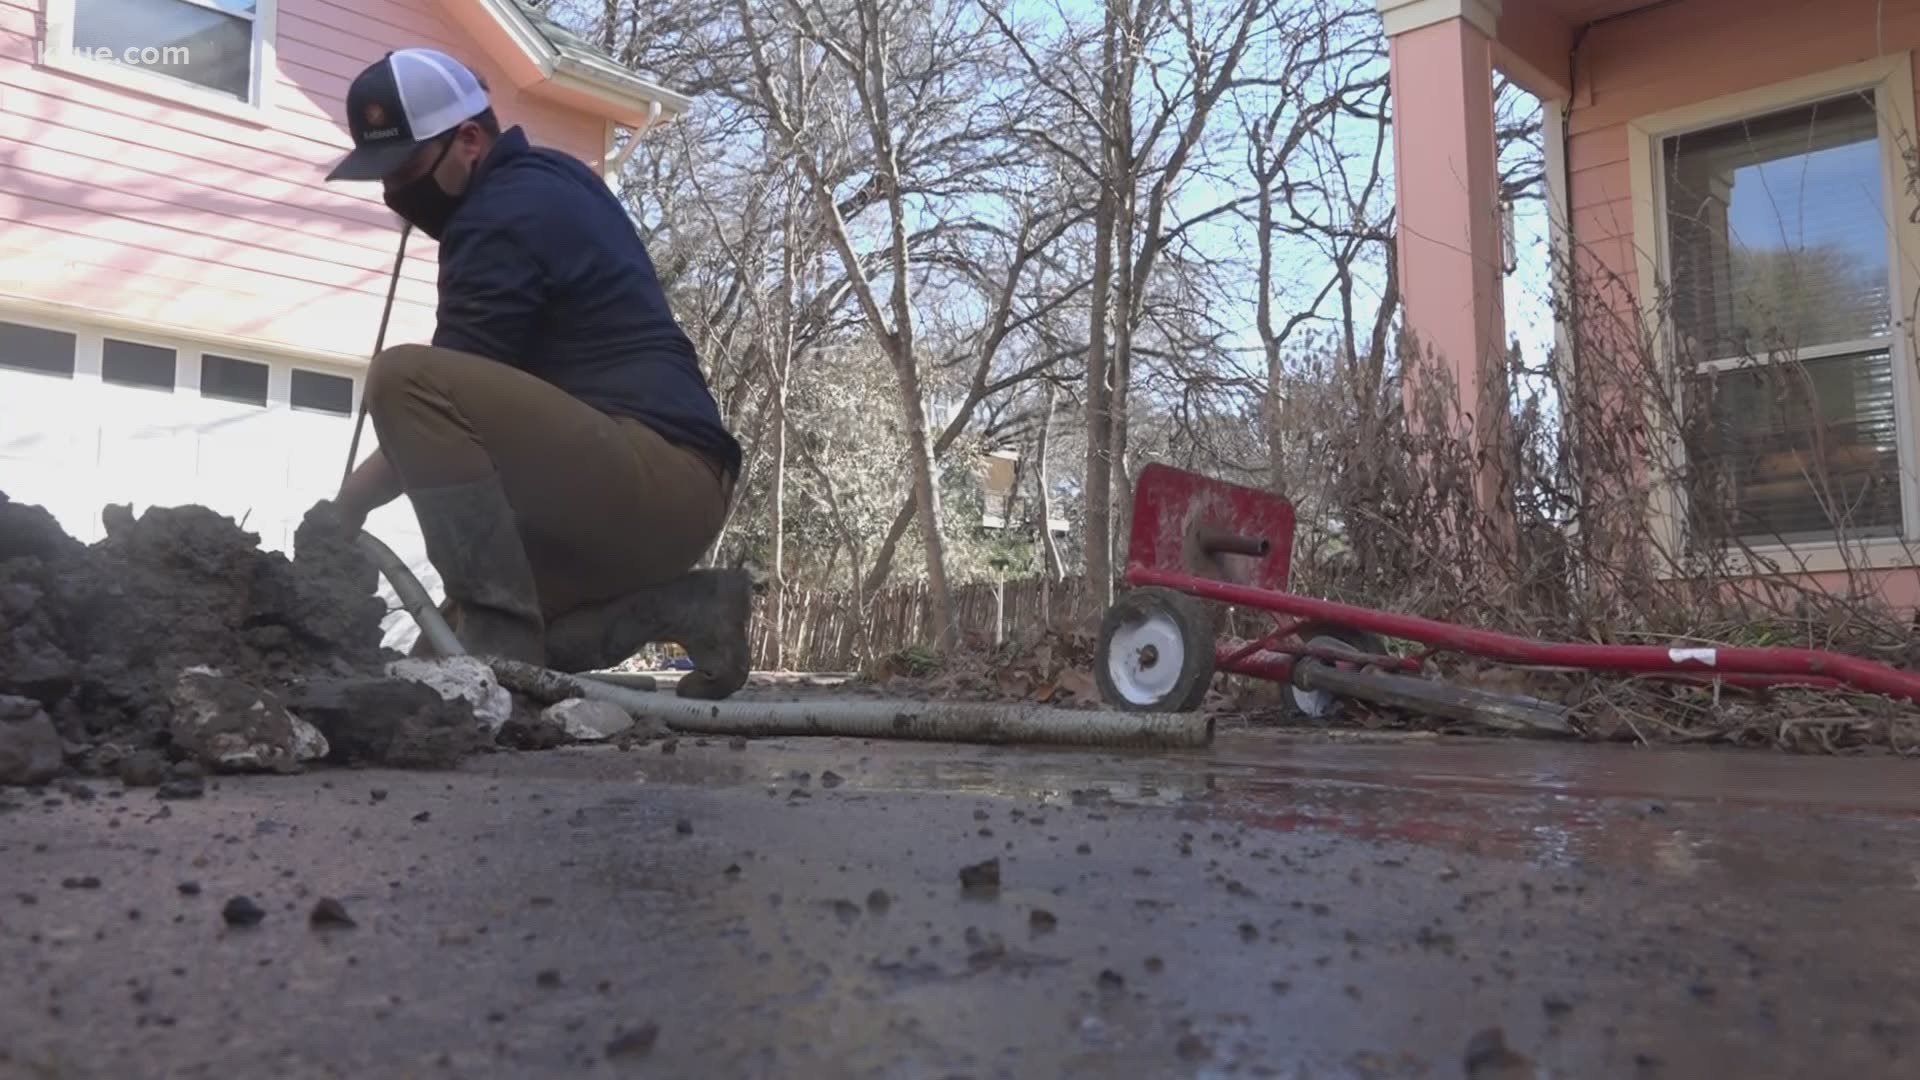 In the past 10 days, the Austin Fire Department said they've responded to almost 2,500 calls for broken pipes.